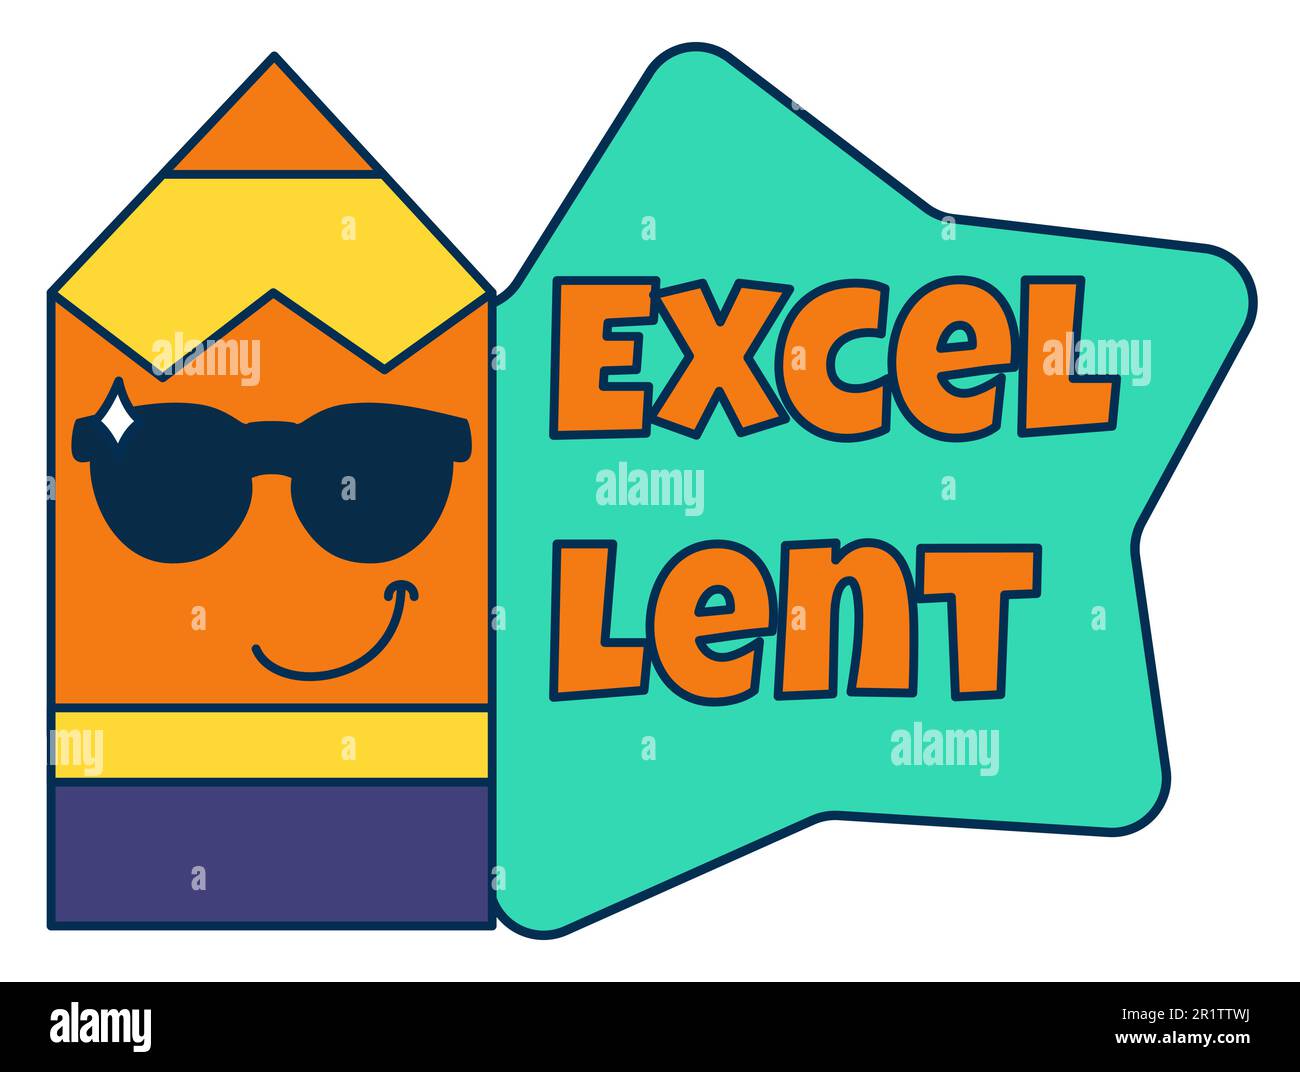 Excellent teacher reward sticker, cute cartoon school award with smiling pencil. Encouragement sign for elementary or primary school pupils. Vector il Stock Vector